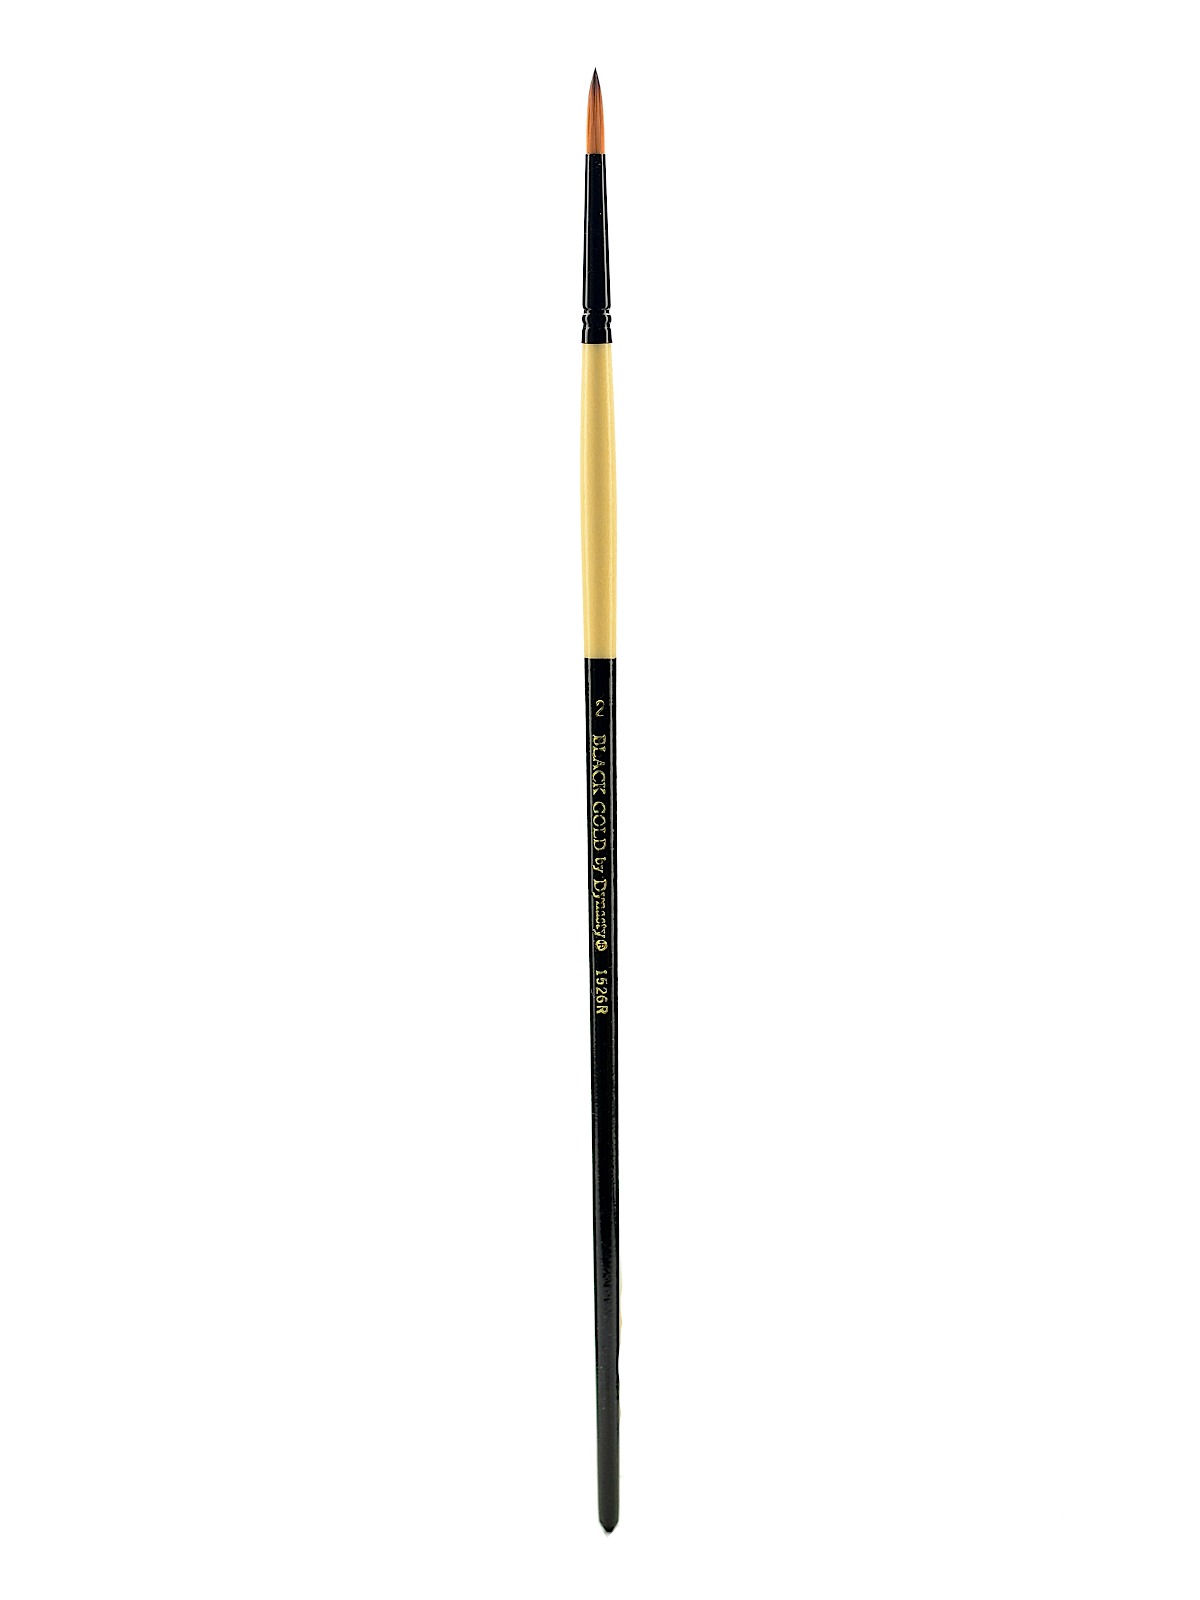 Dynasty Black Gold Series Long Handled Synthetic Brushes